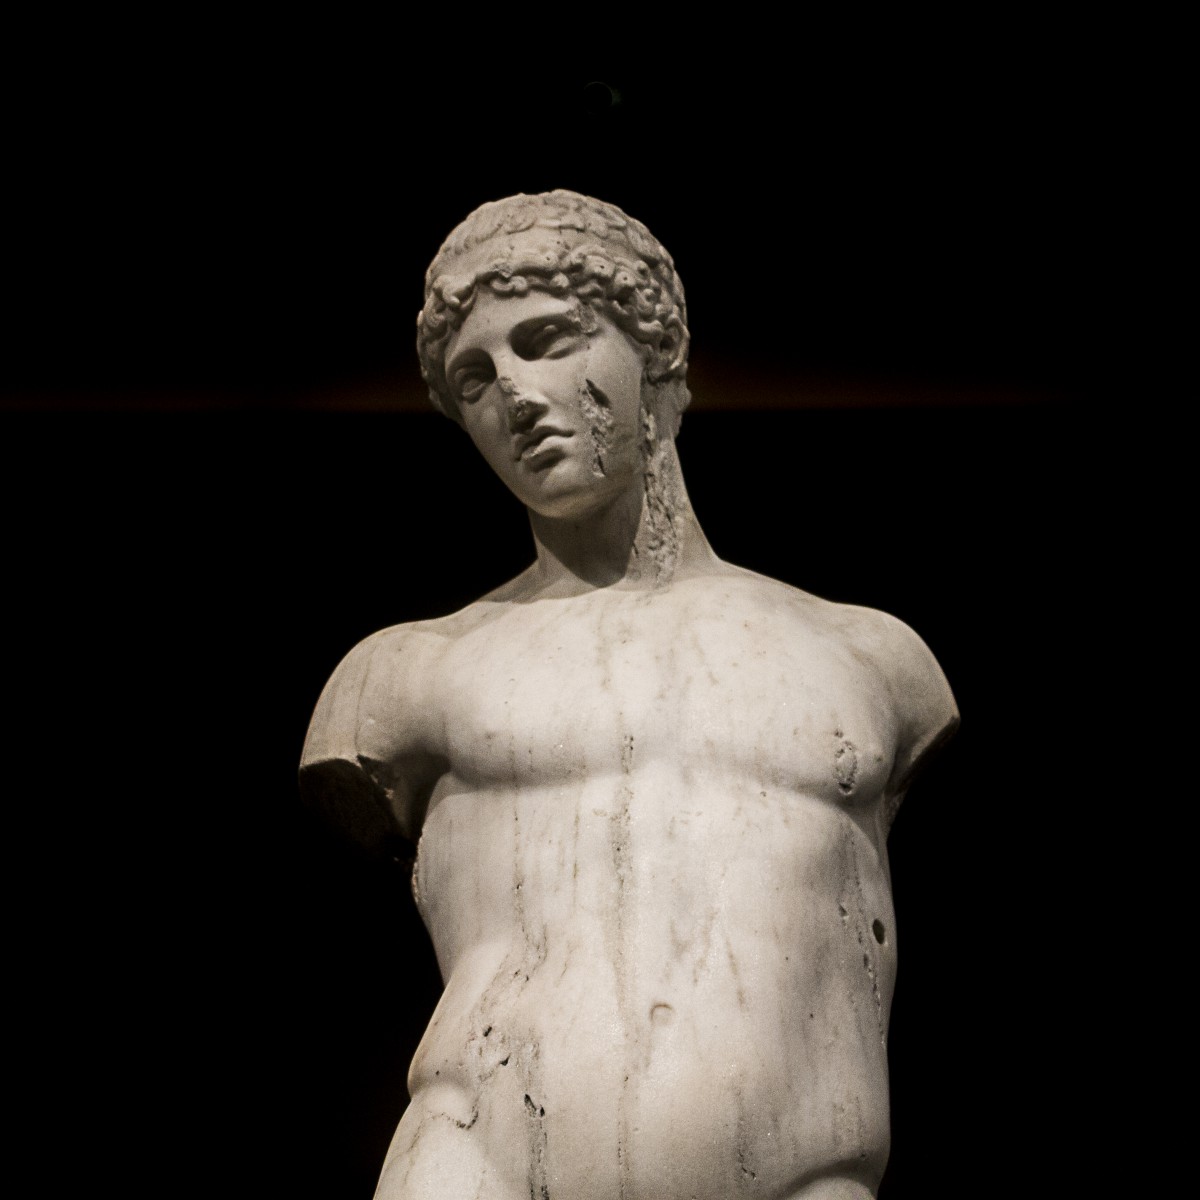 a partly in-tact white marble statue of a person